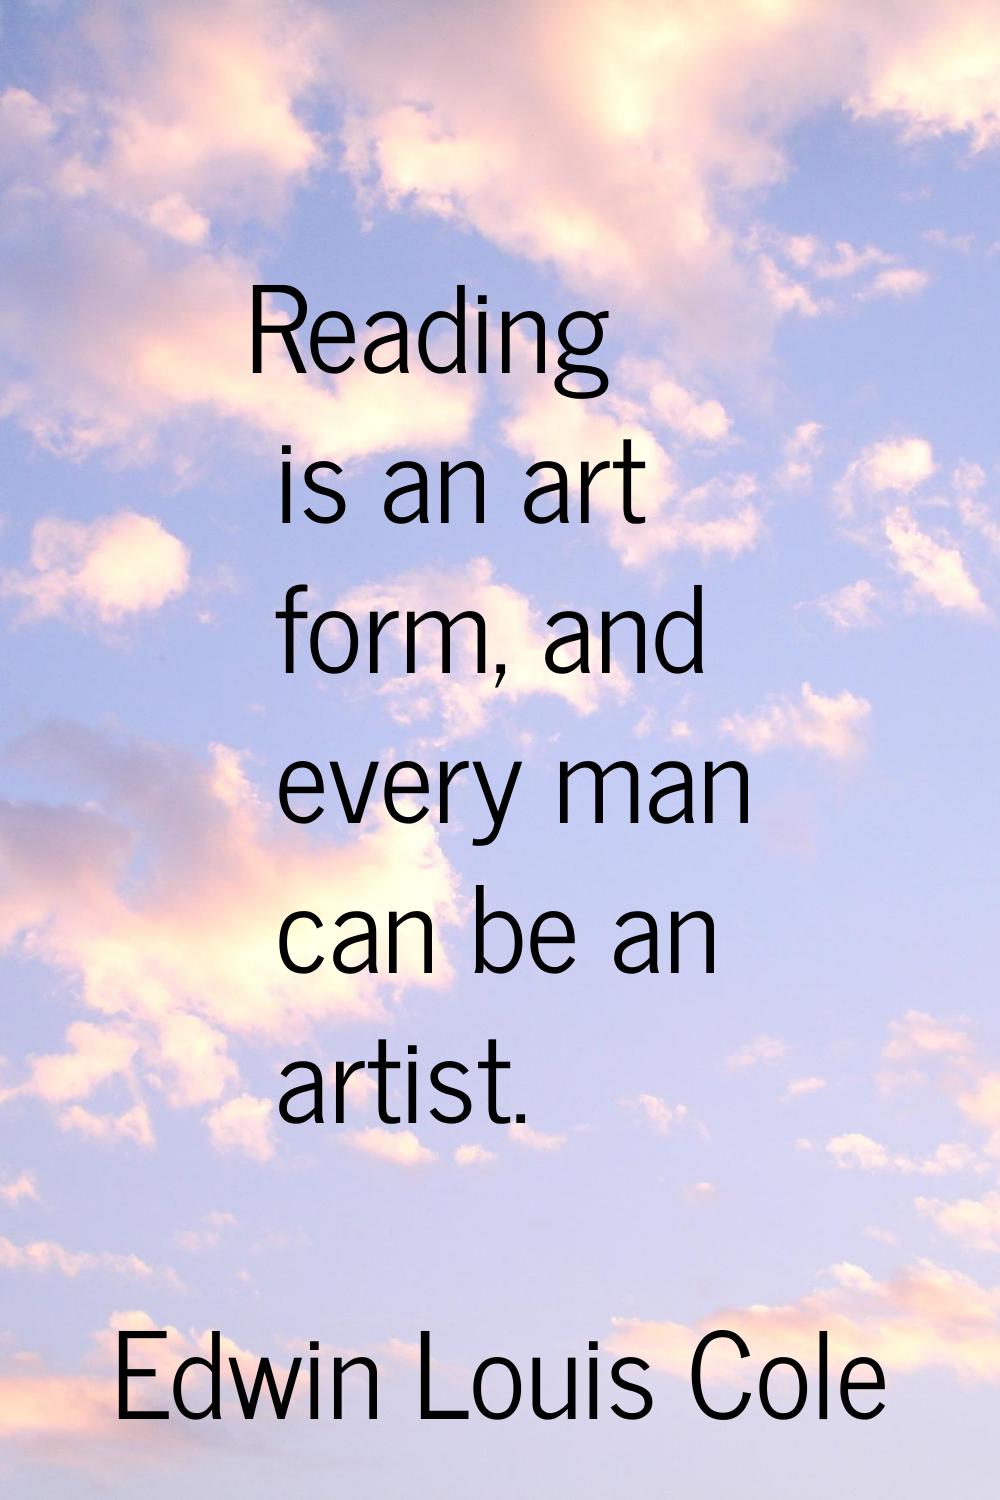 Reading is an art form, and every man can be an artist.